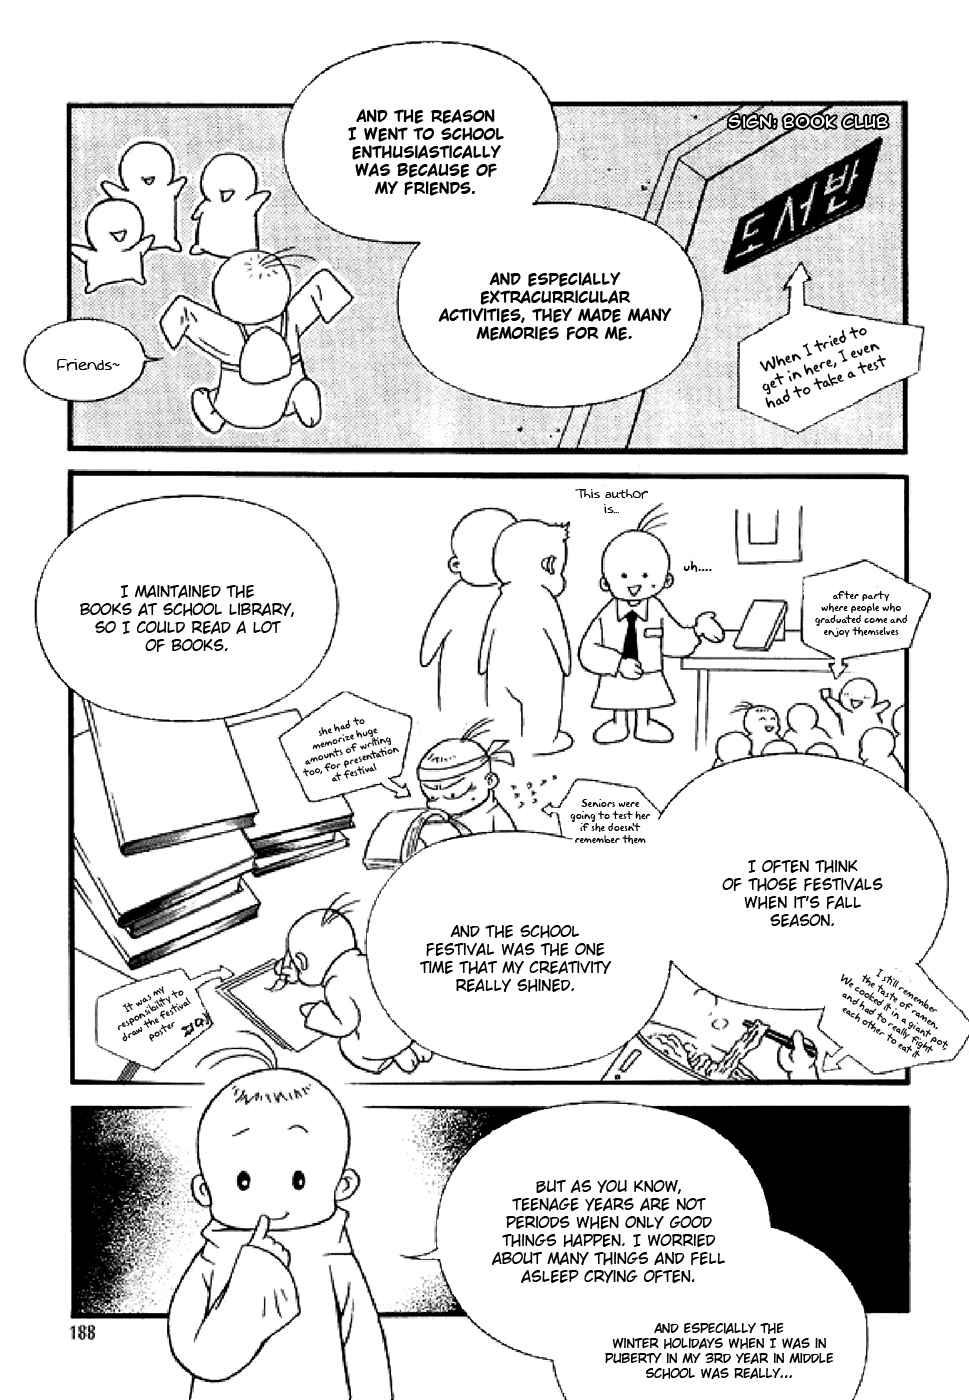 50 Rules for Teenagers Vol.6 Ch.40